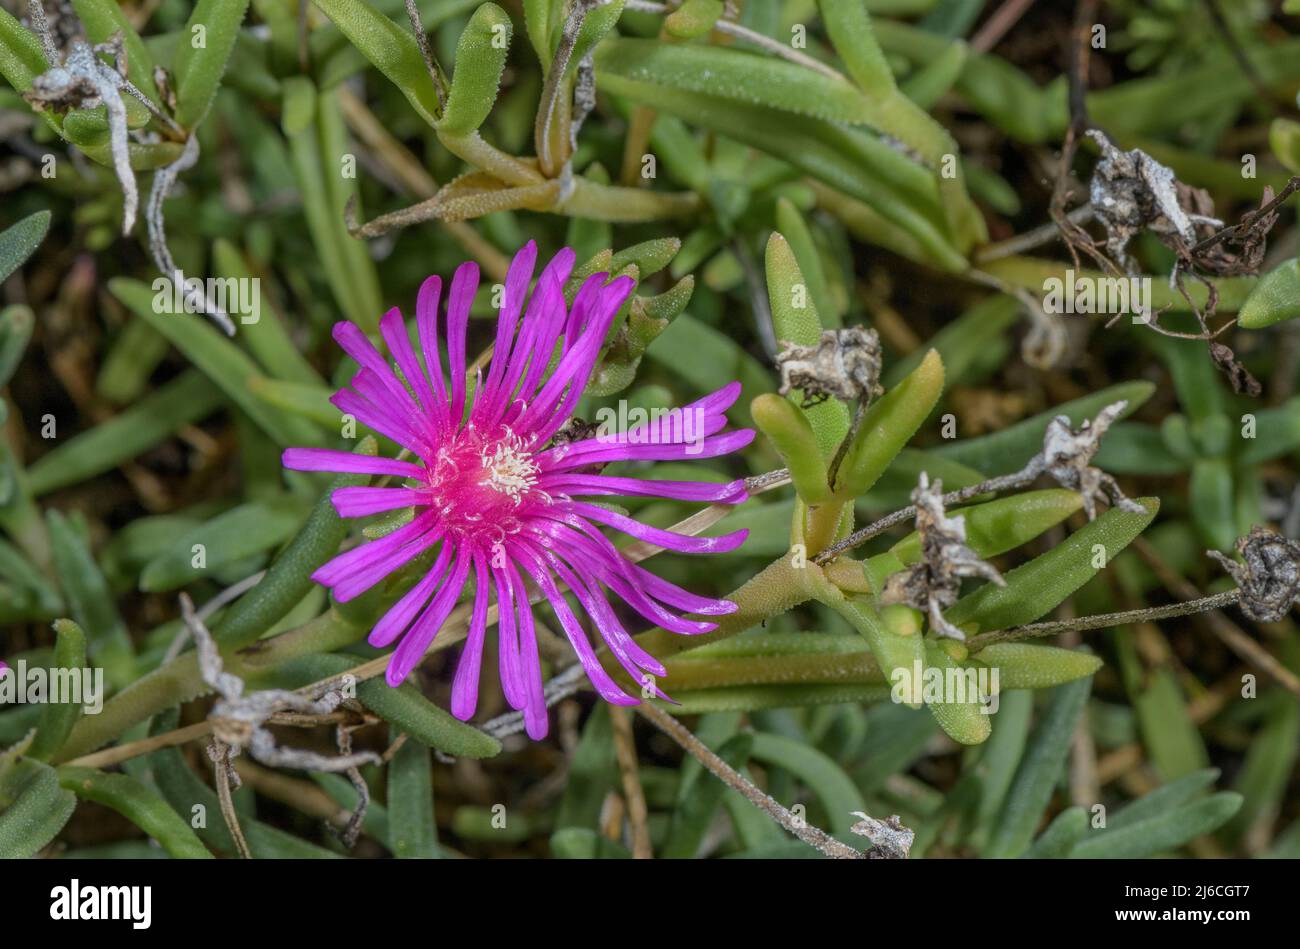 Trailing Iceplant, Delosperma cooperi, from South Africa. Stock Photo